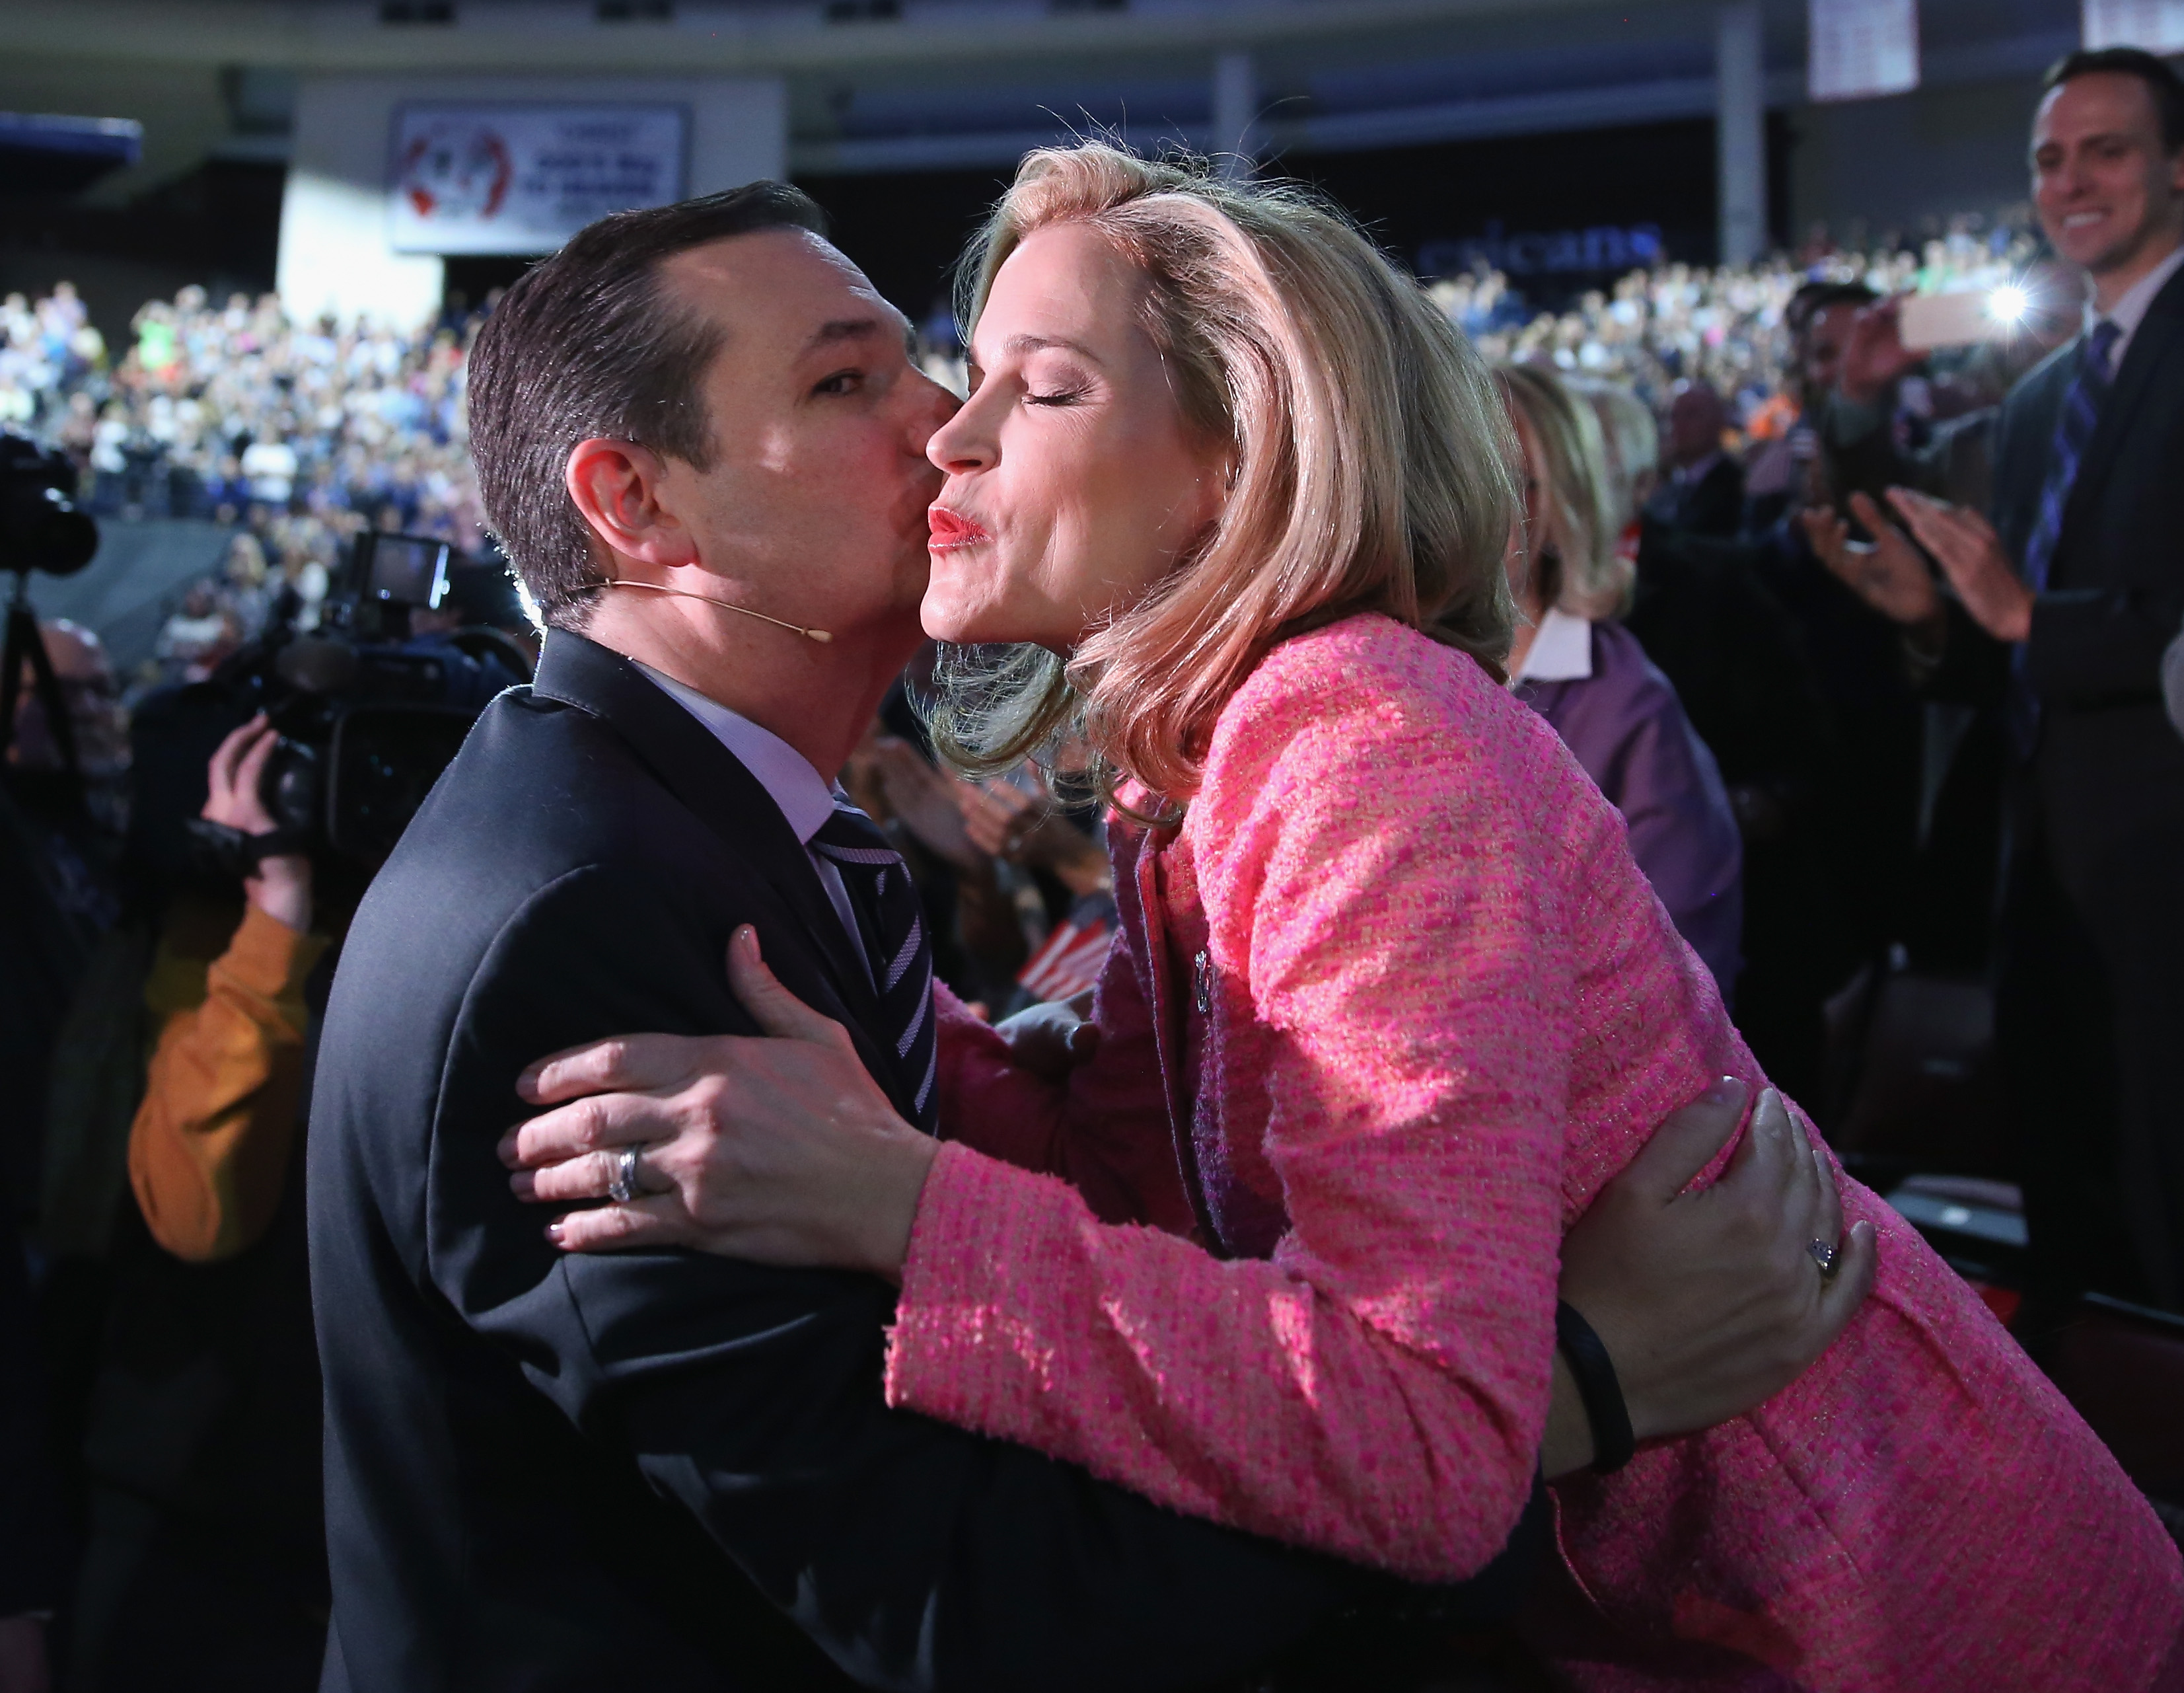 Sen. Ted Cruz (R-TX) kisses his wife before walking onstage to speak at Liberty University to announce his presidential candidacy. (Getty)